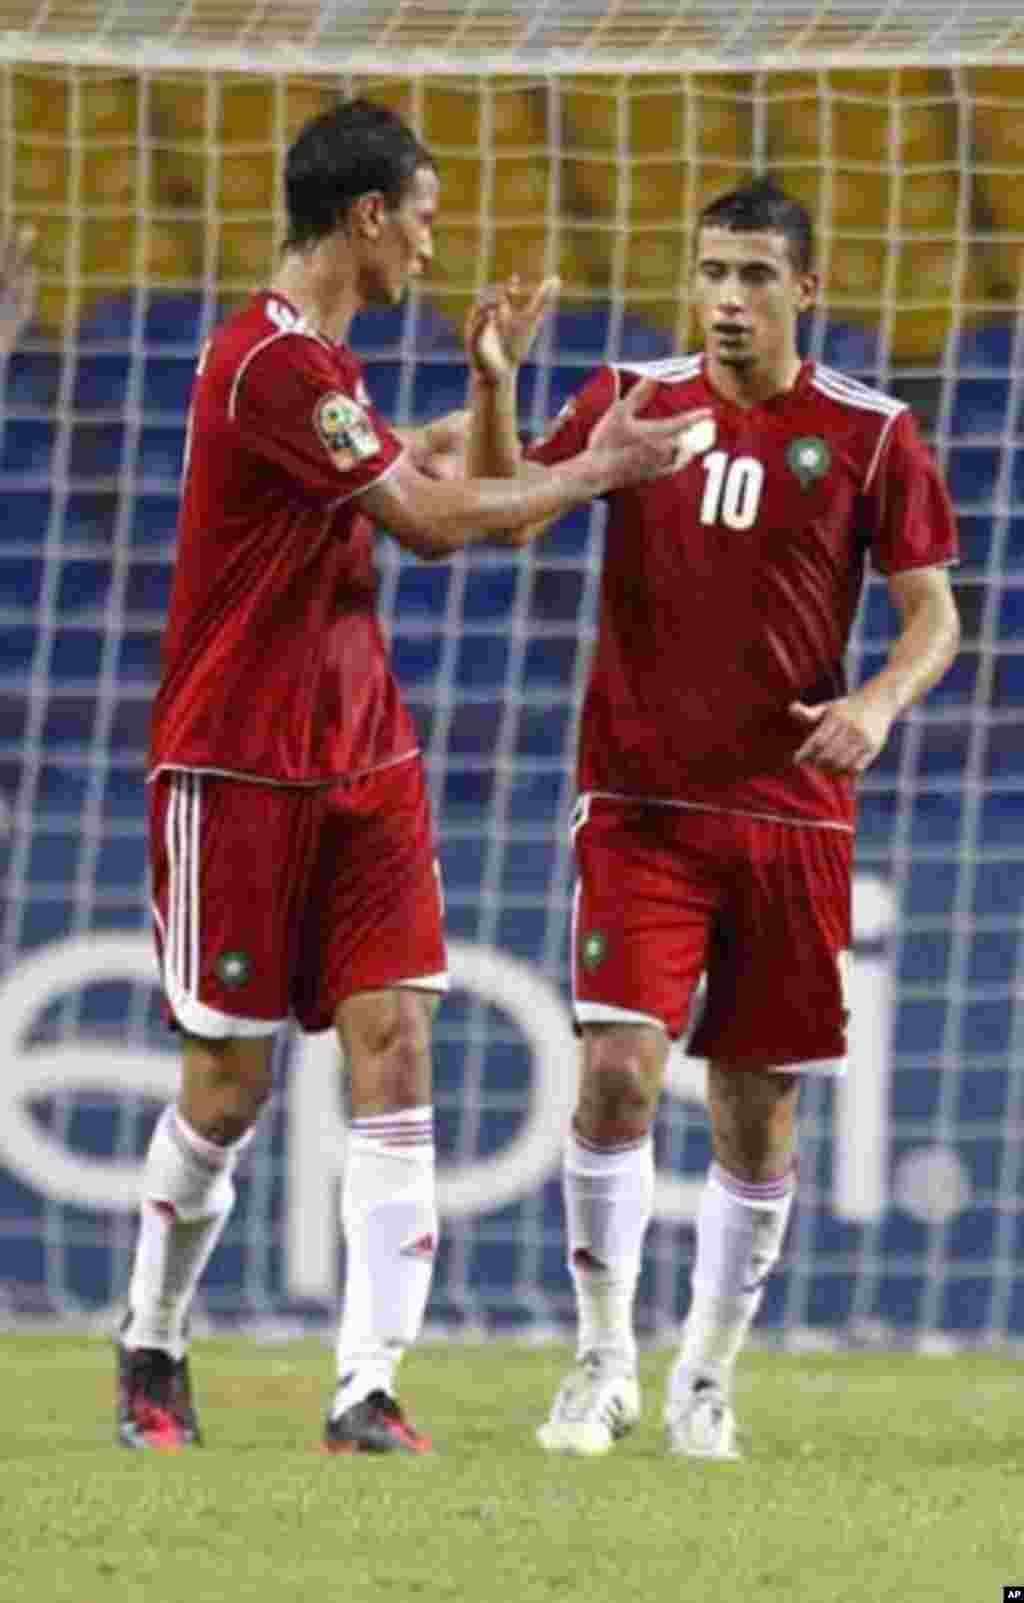 Morocco's Younes Belhanda (10) celebrates his goal against Niger with teammate Marouane Chamakh during their African Cup of Nations Group C soccer match at the Stade De L'Amitie Stadium in Libreville, Gabon January 31, 2012.